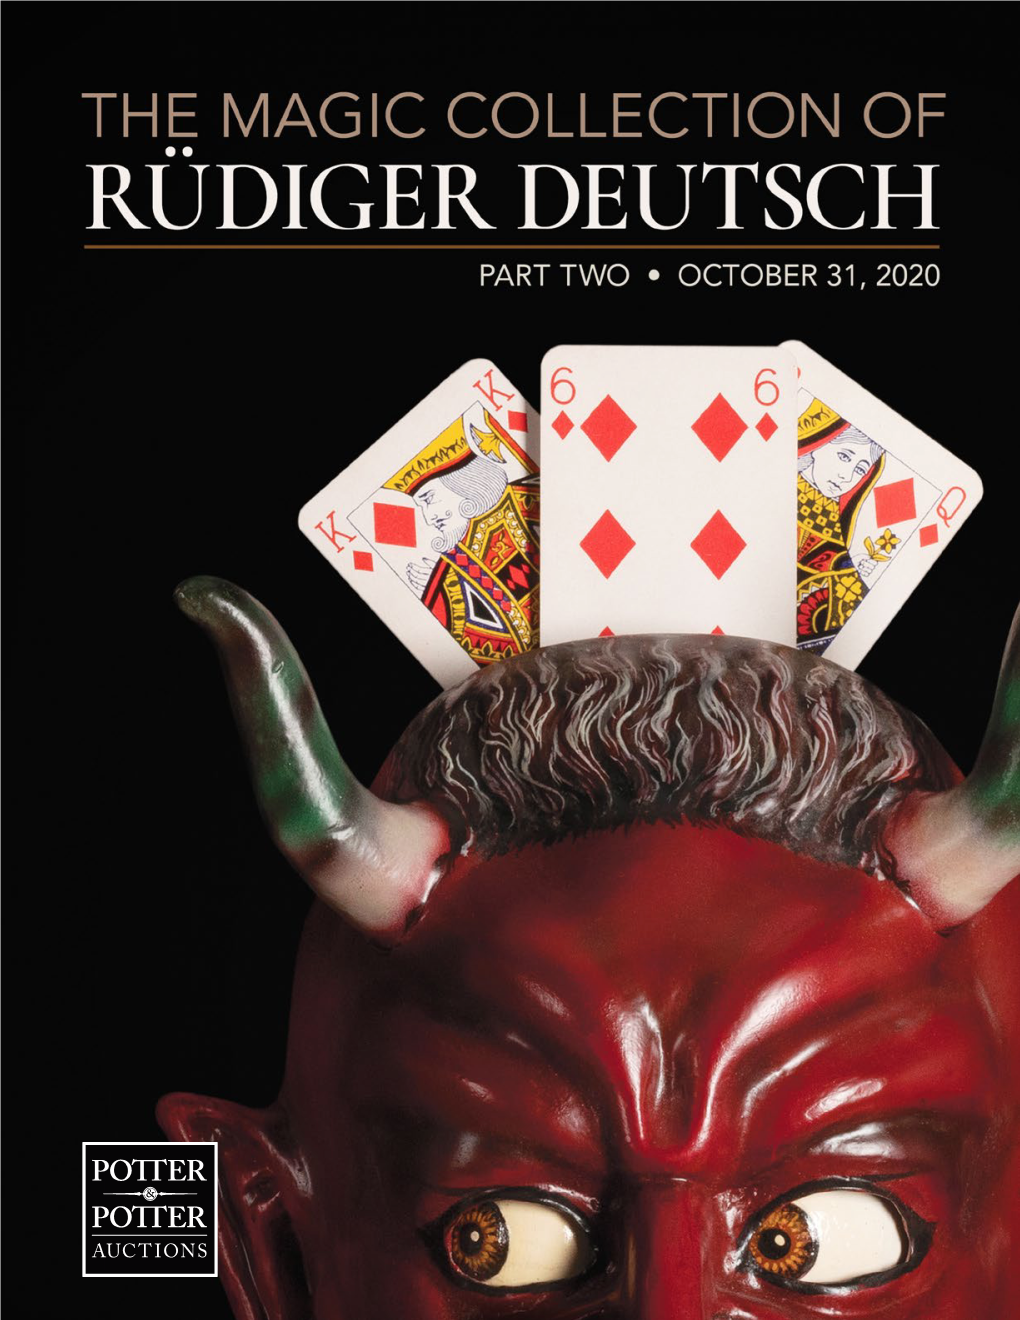 The Magic Collection of Rüdiger Deutsch Part Two